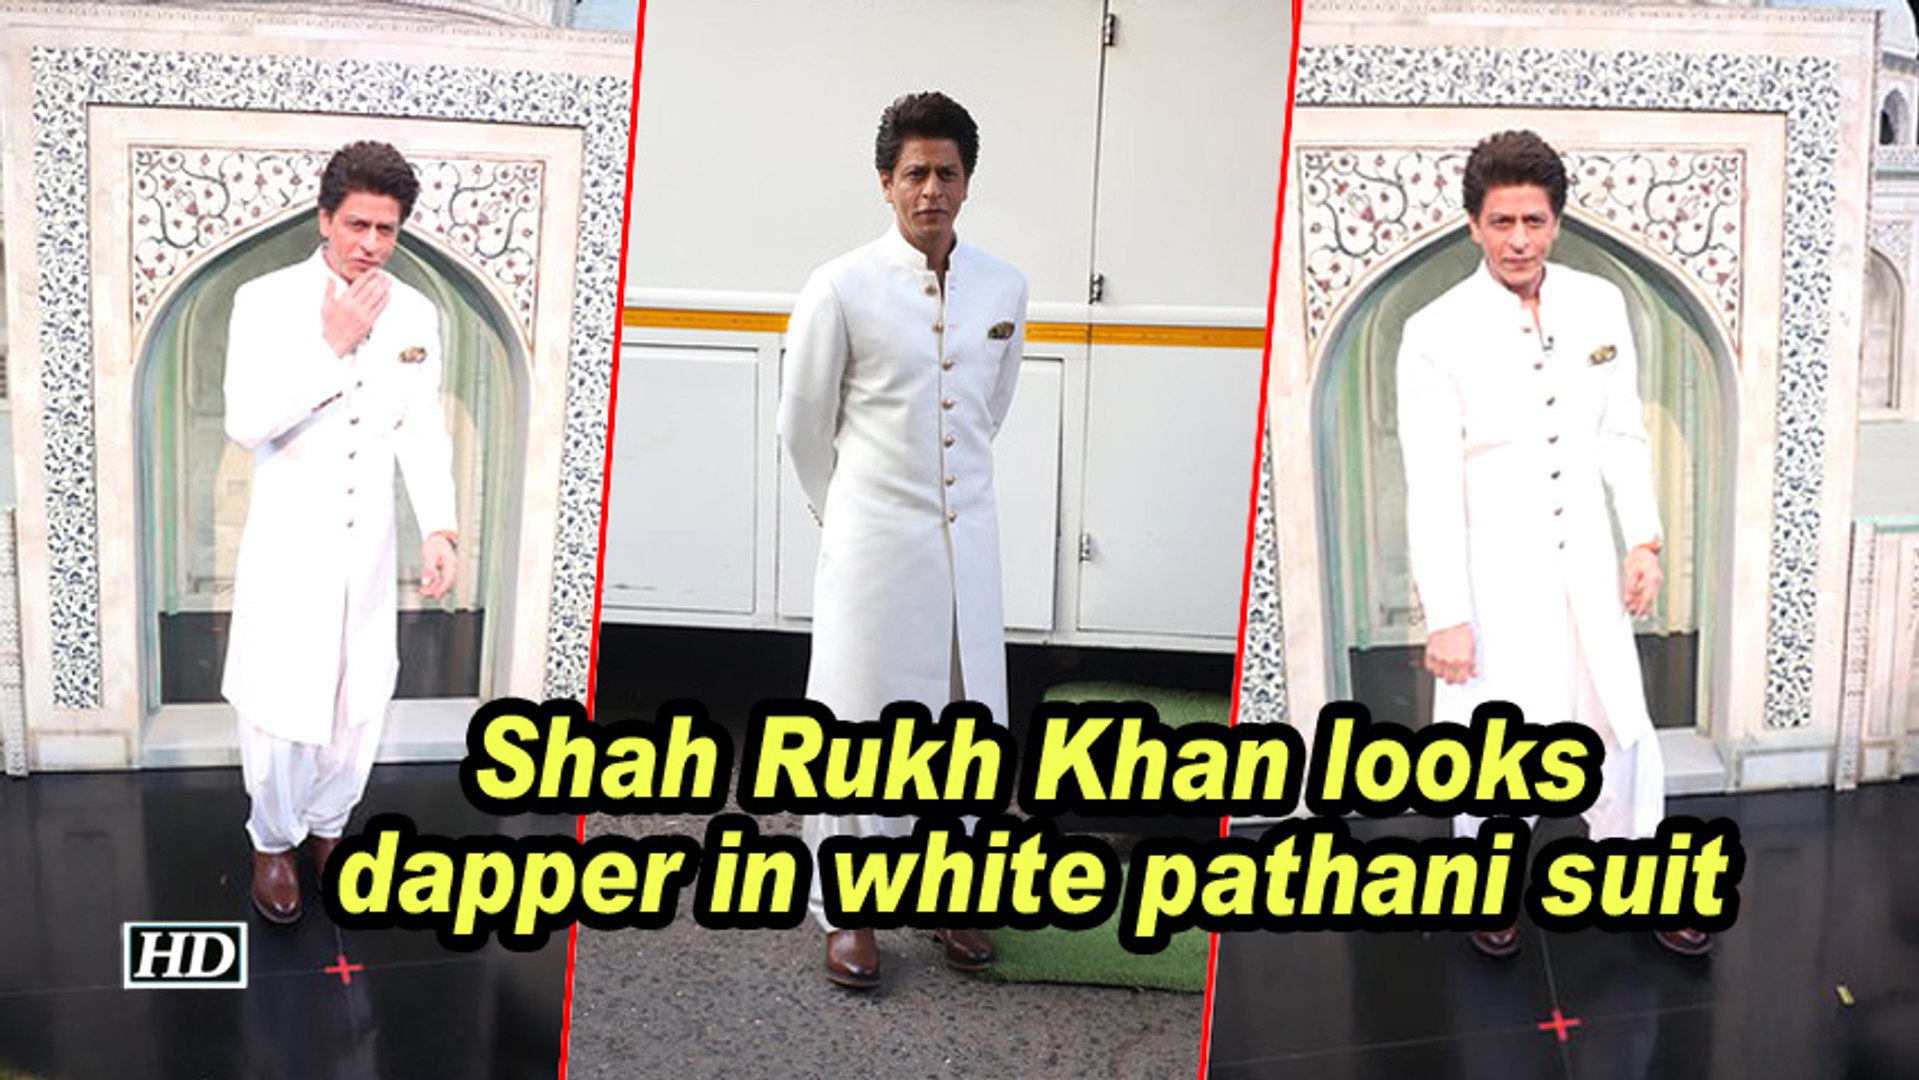 Shah Rukh Khan looks dapper in white pathani suit - video Dailymotion